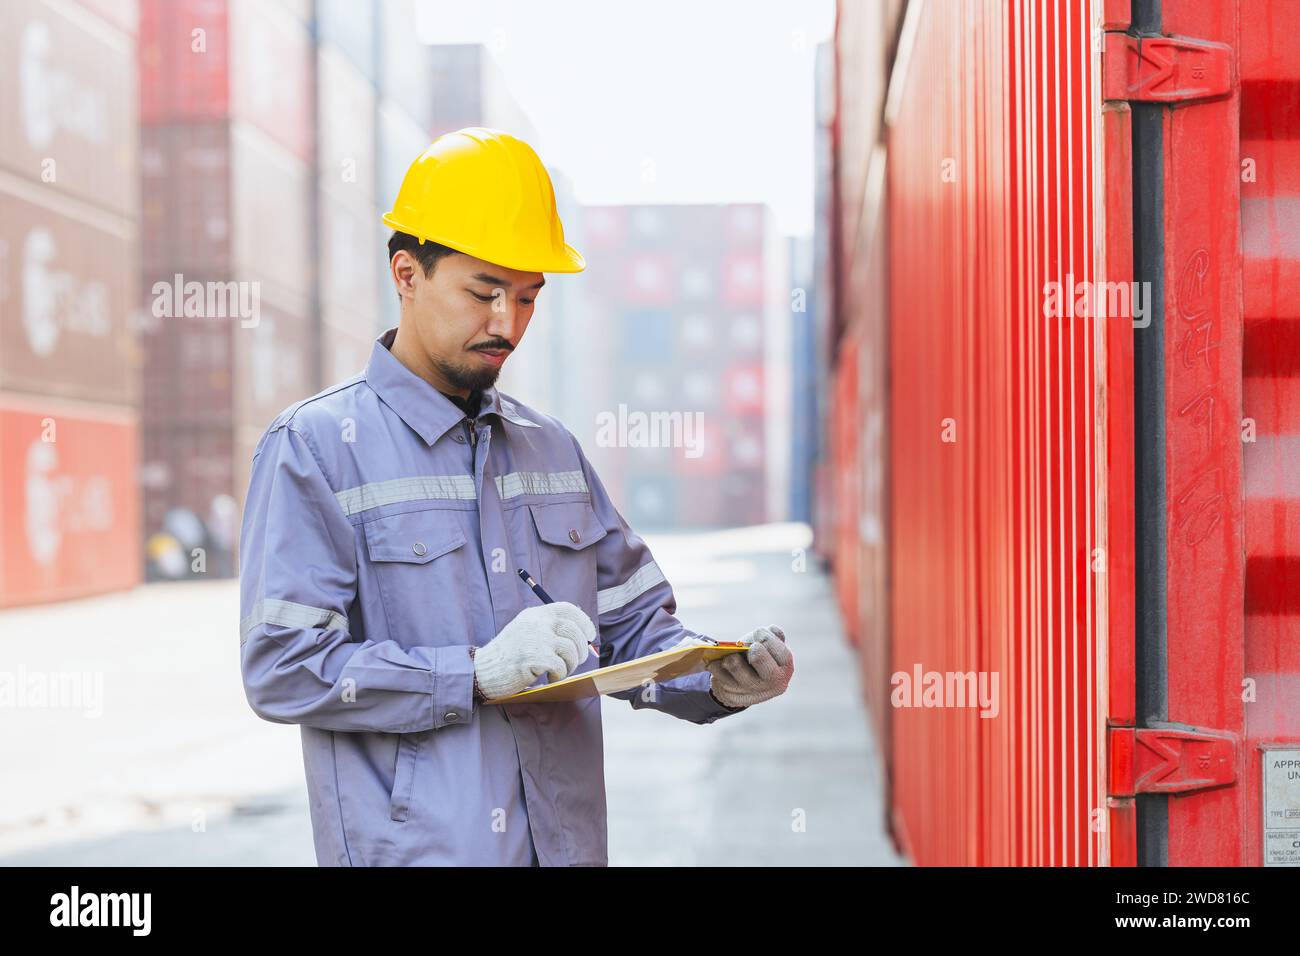 Japanese male smart worker working in container port cargo. Japan shipping logistics industry customs staff. Stock Photo